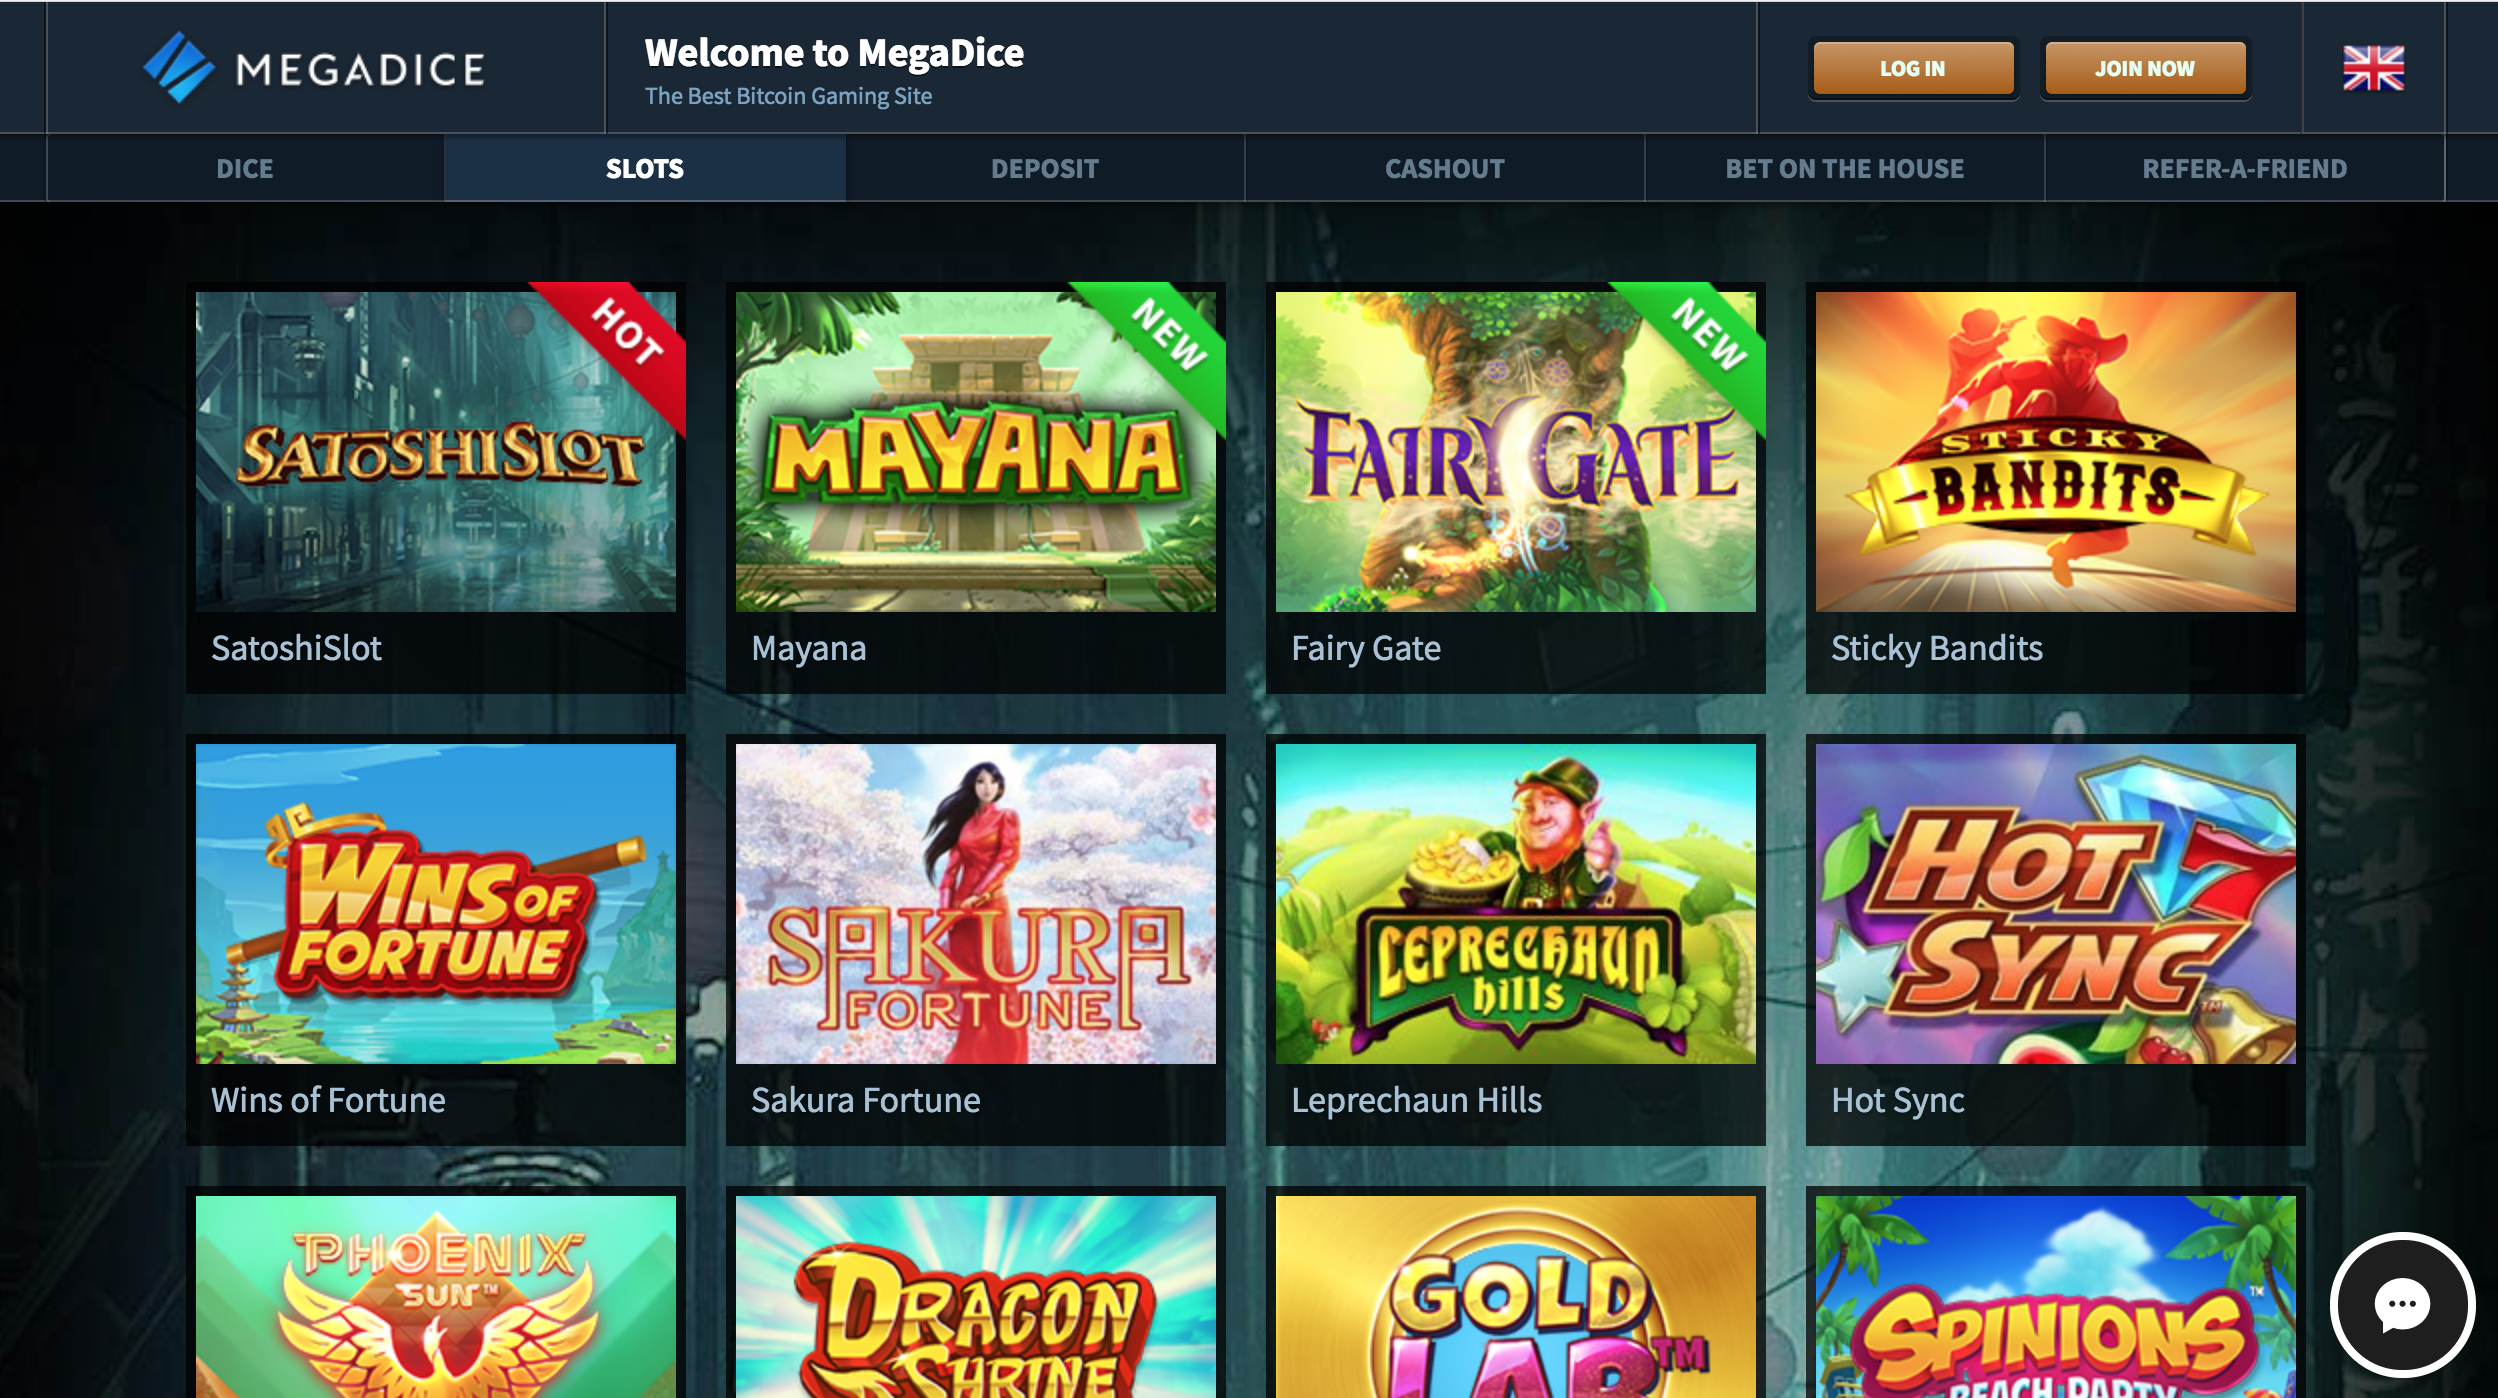 A few of the slot games available on MegaDice